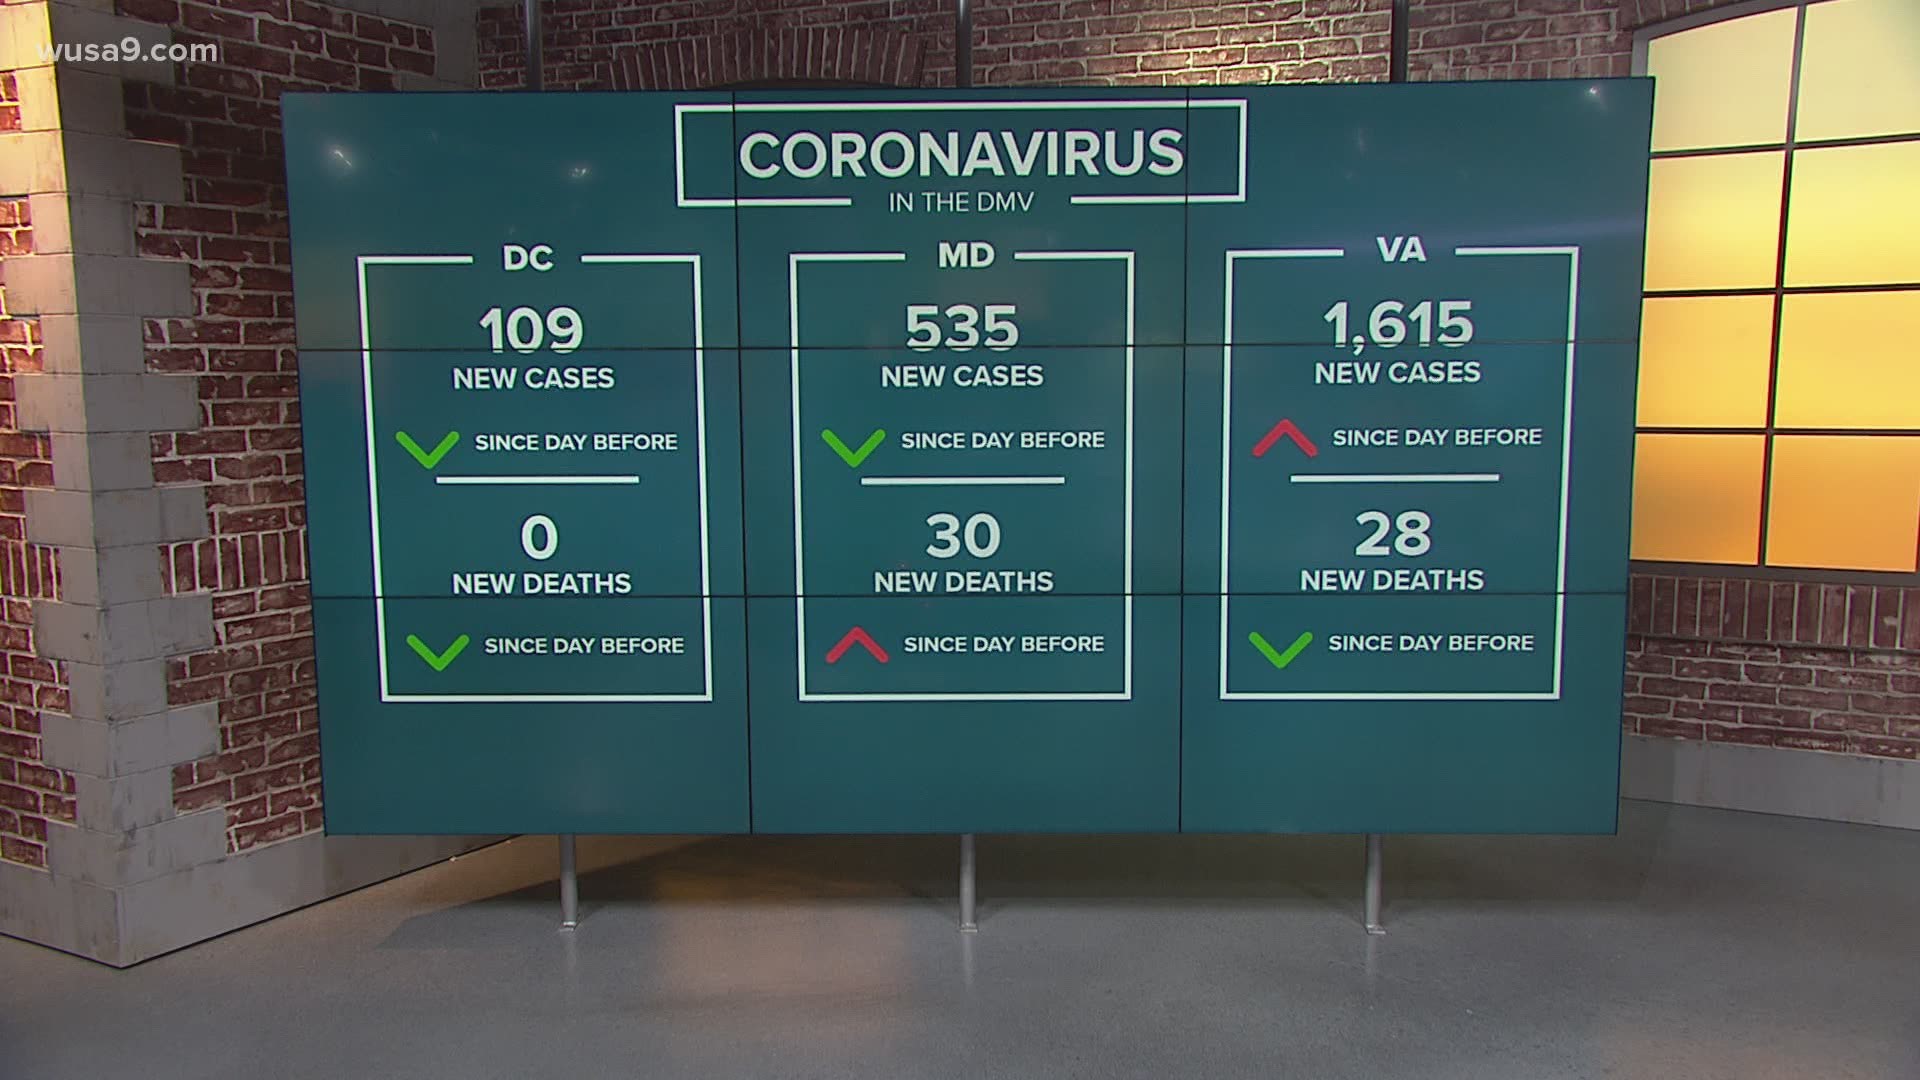 Here are the latest details for the coronavirus outbreak and reopening plans in DC, Maryland and Virginia.